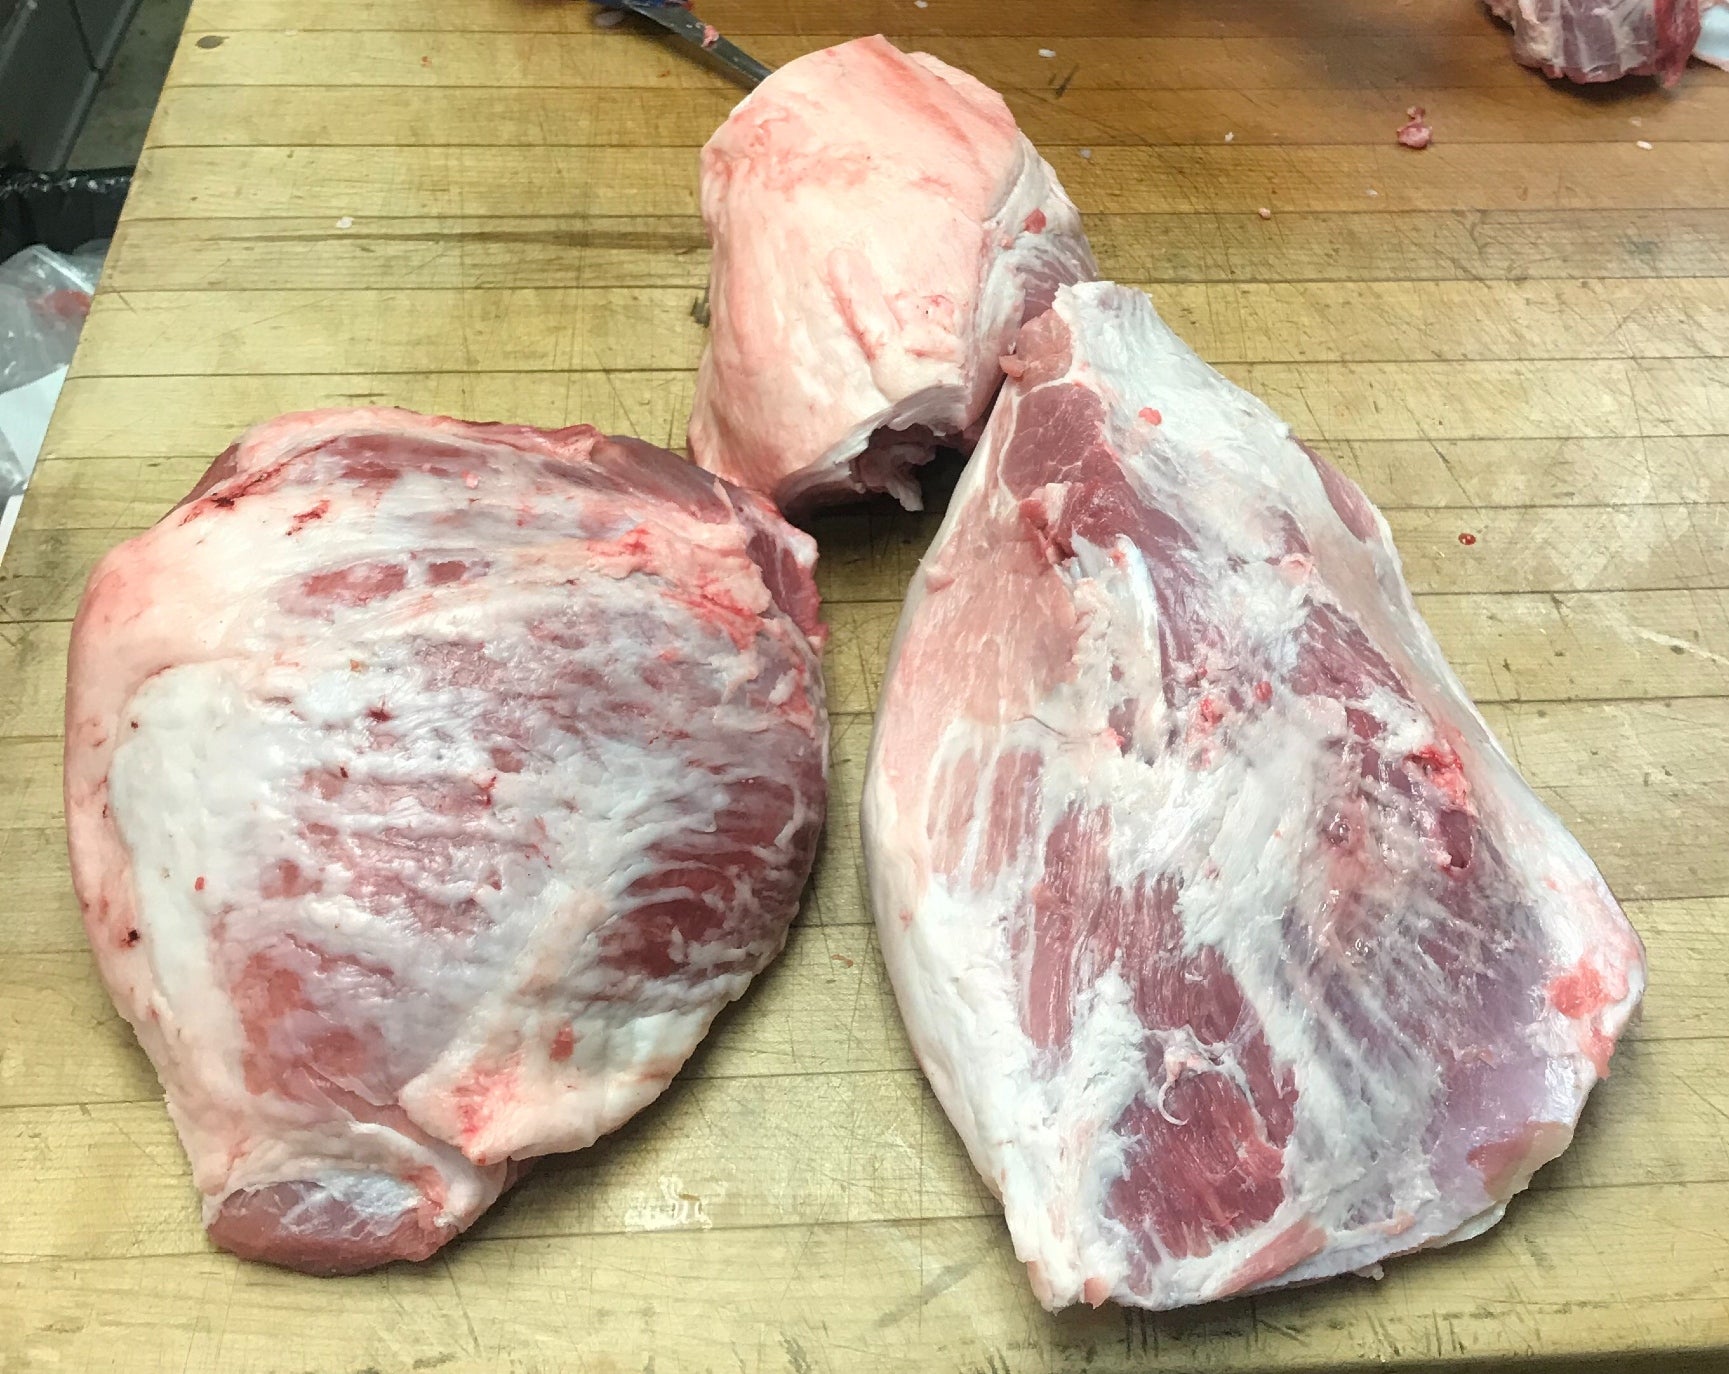 A picture showing the three main muscle cuts from the hind leg of a pig on a butcher table.